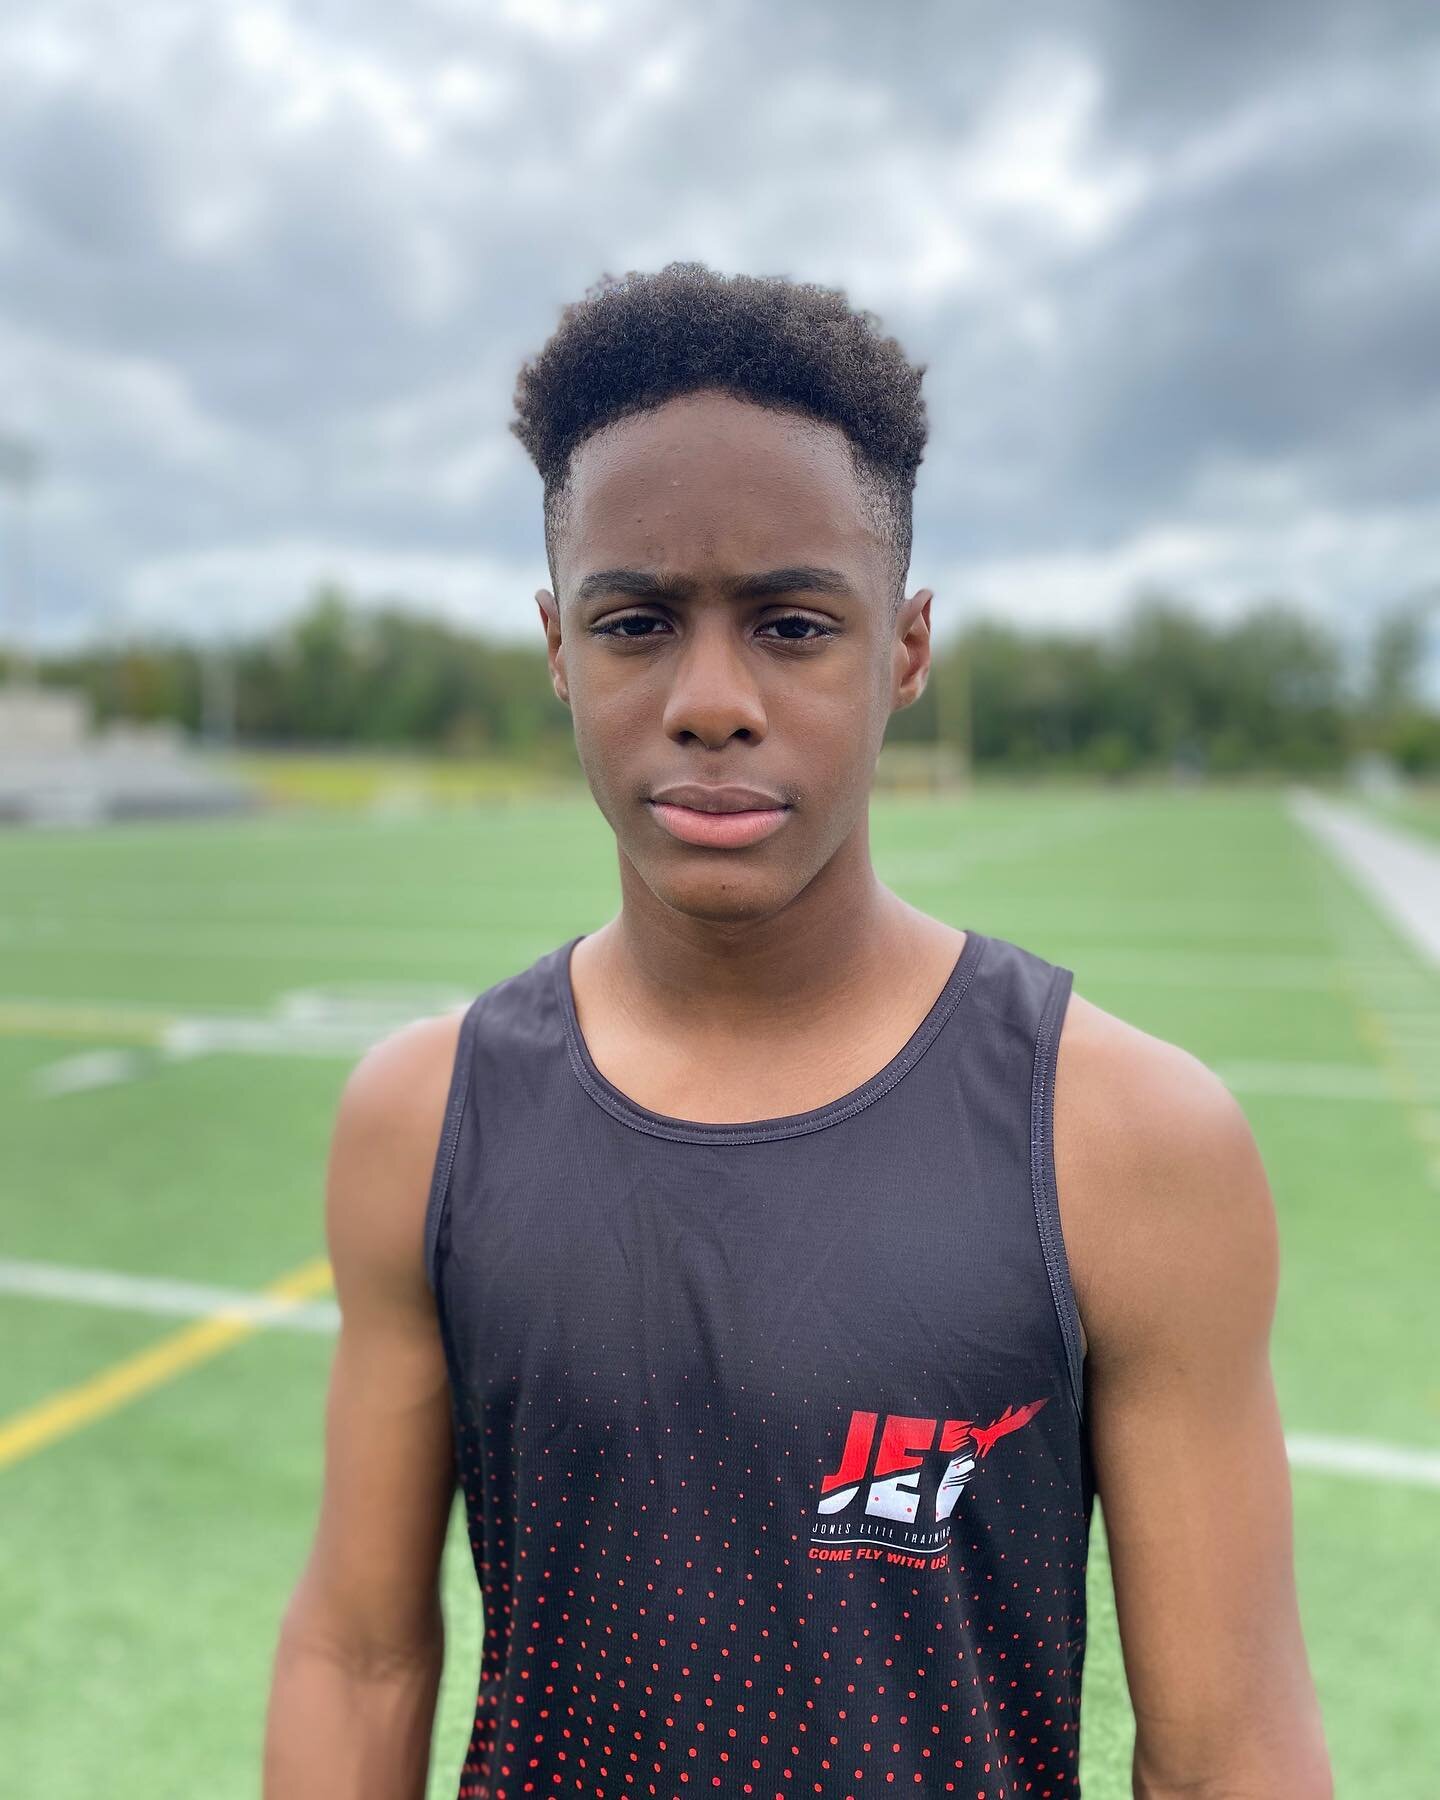 🚨 US #1 Alert 🚨JET athlete Evan Boykin @clt_evanb takes US #1 spot in the 14 year old age group 100m with a new PR time is 11.04 in the prelims at the AAU club championship. Come fly with us!